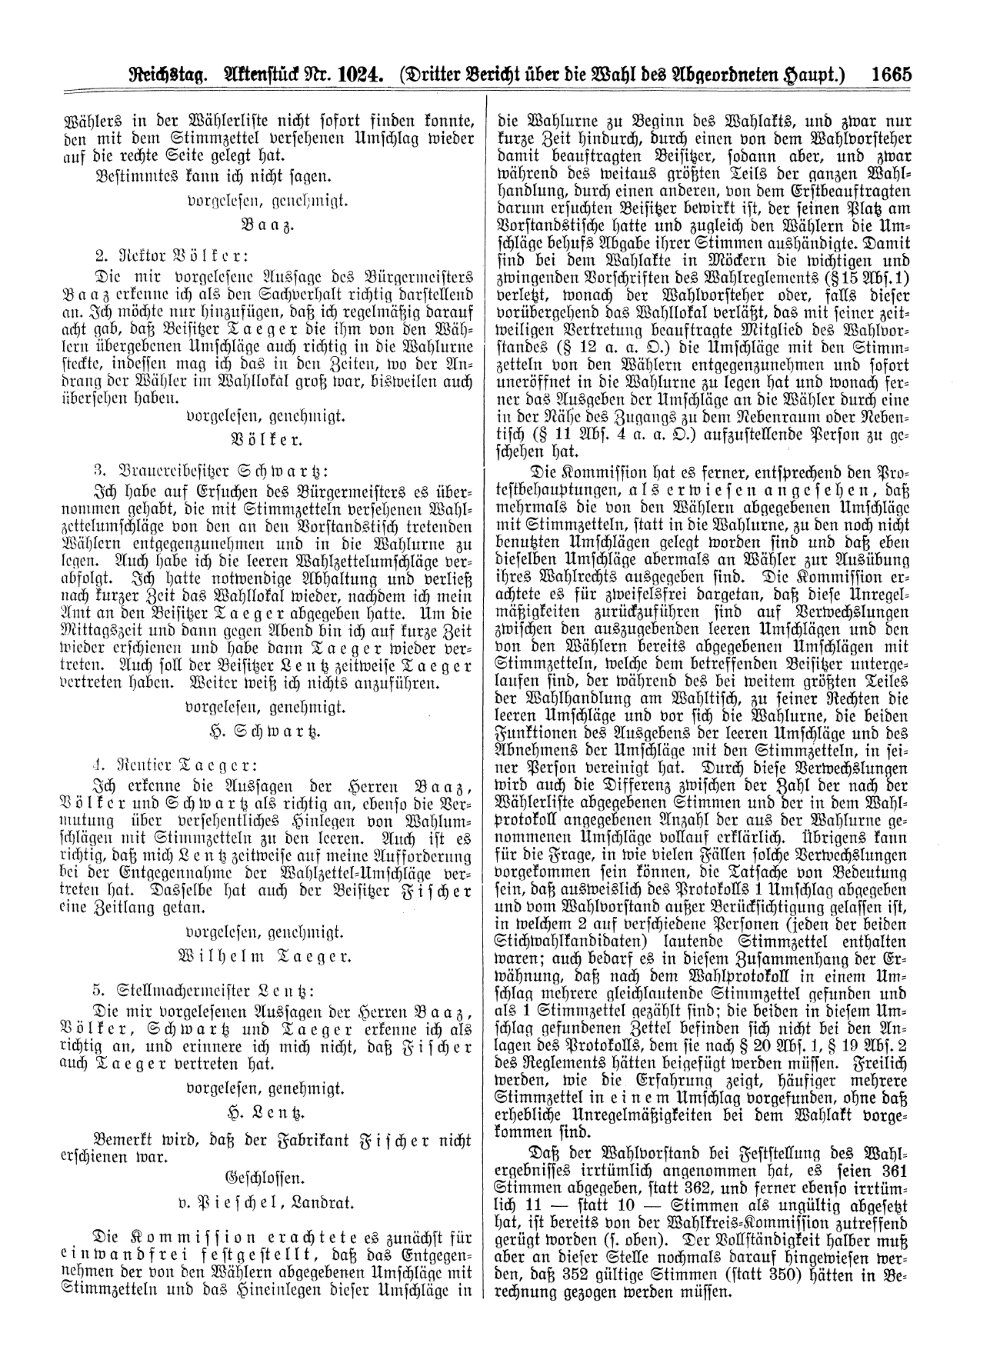 Scan of page 1665